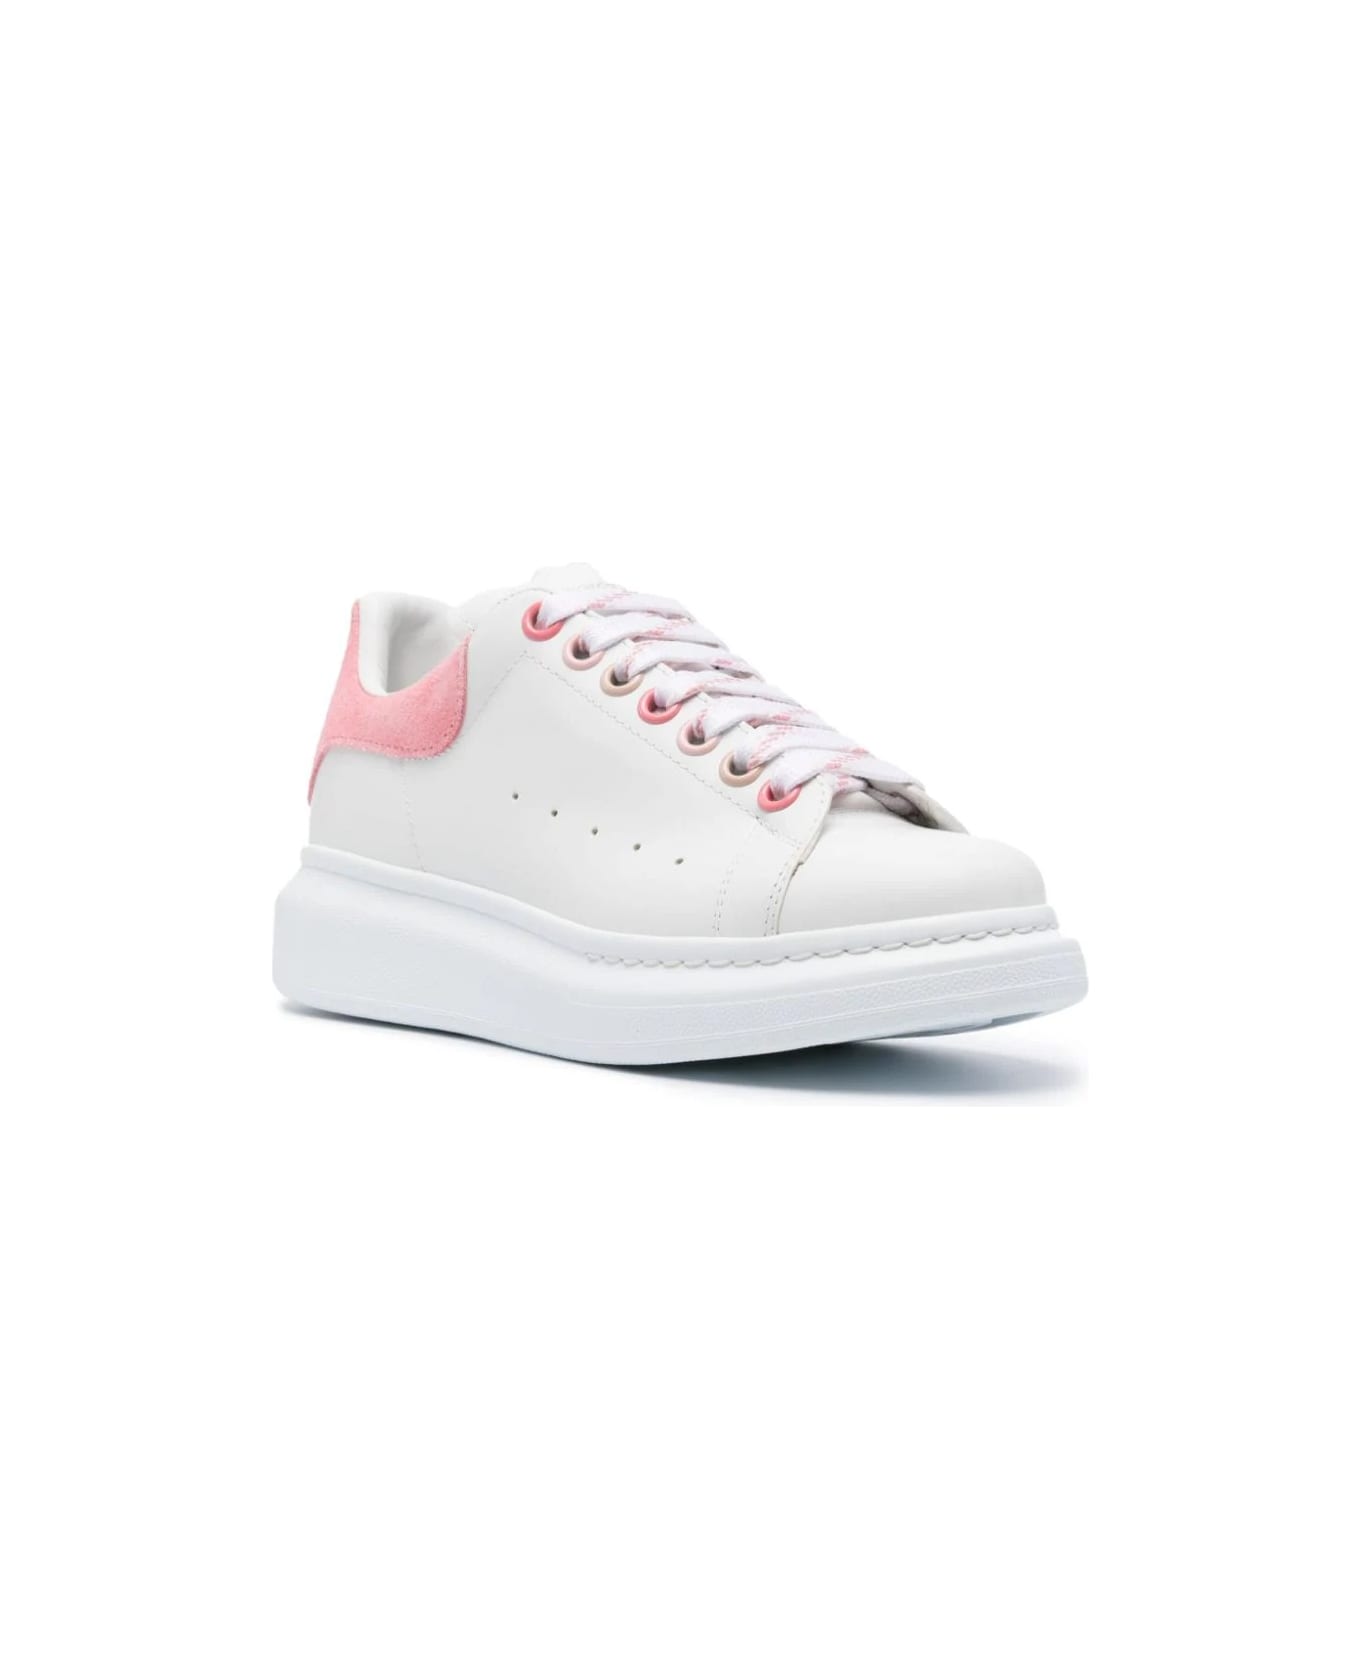 Alexander McQueen White Oversized Sneakers With Pink And Multicolour Details - White ウェッジシューズ